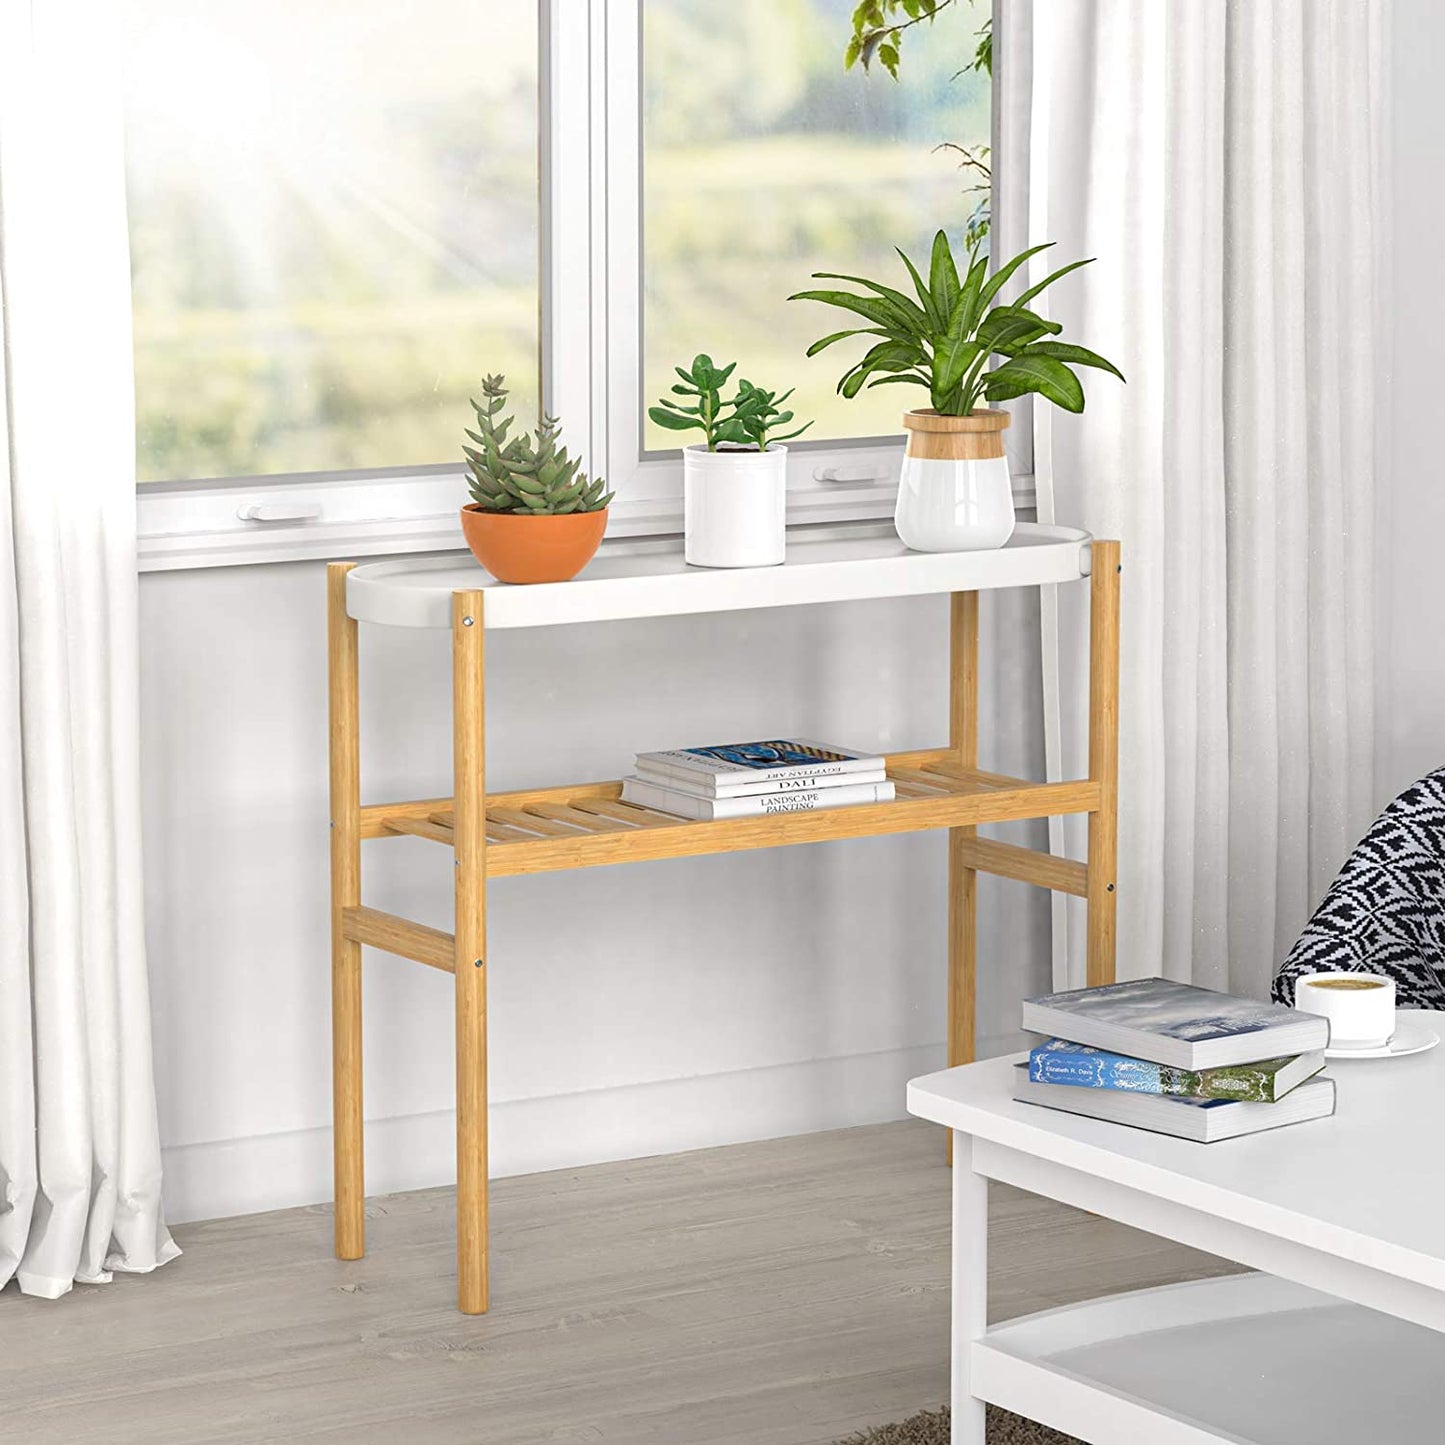 Casa De Amor Bamboo Plant Shelf Indoor, 2 Tier Tall Plant Stand Table for Multiple Plants, Window Table for Plants (2 Tier Shelf)